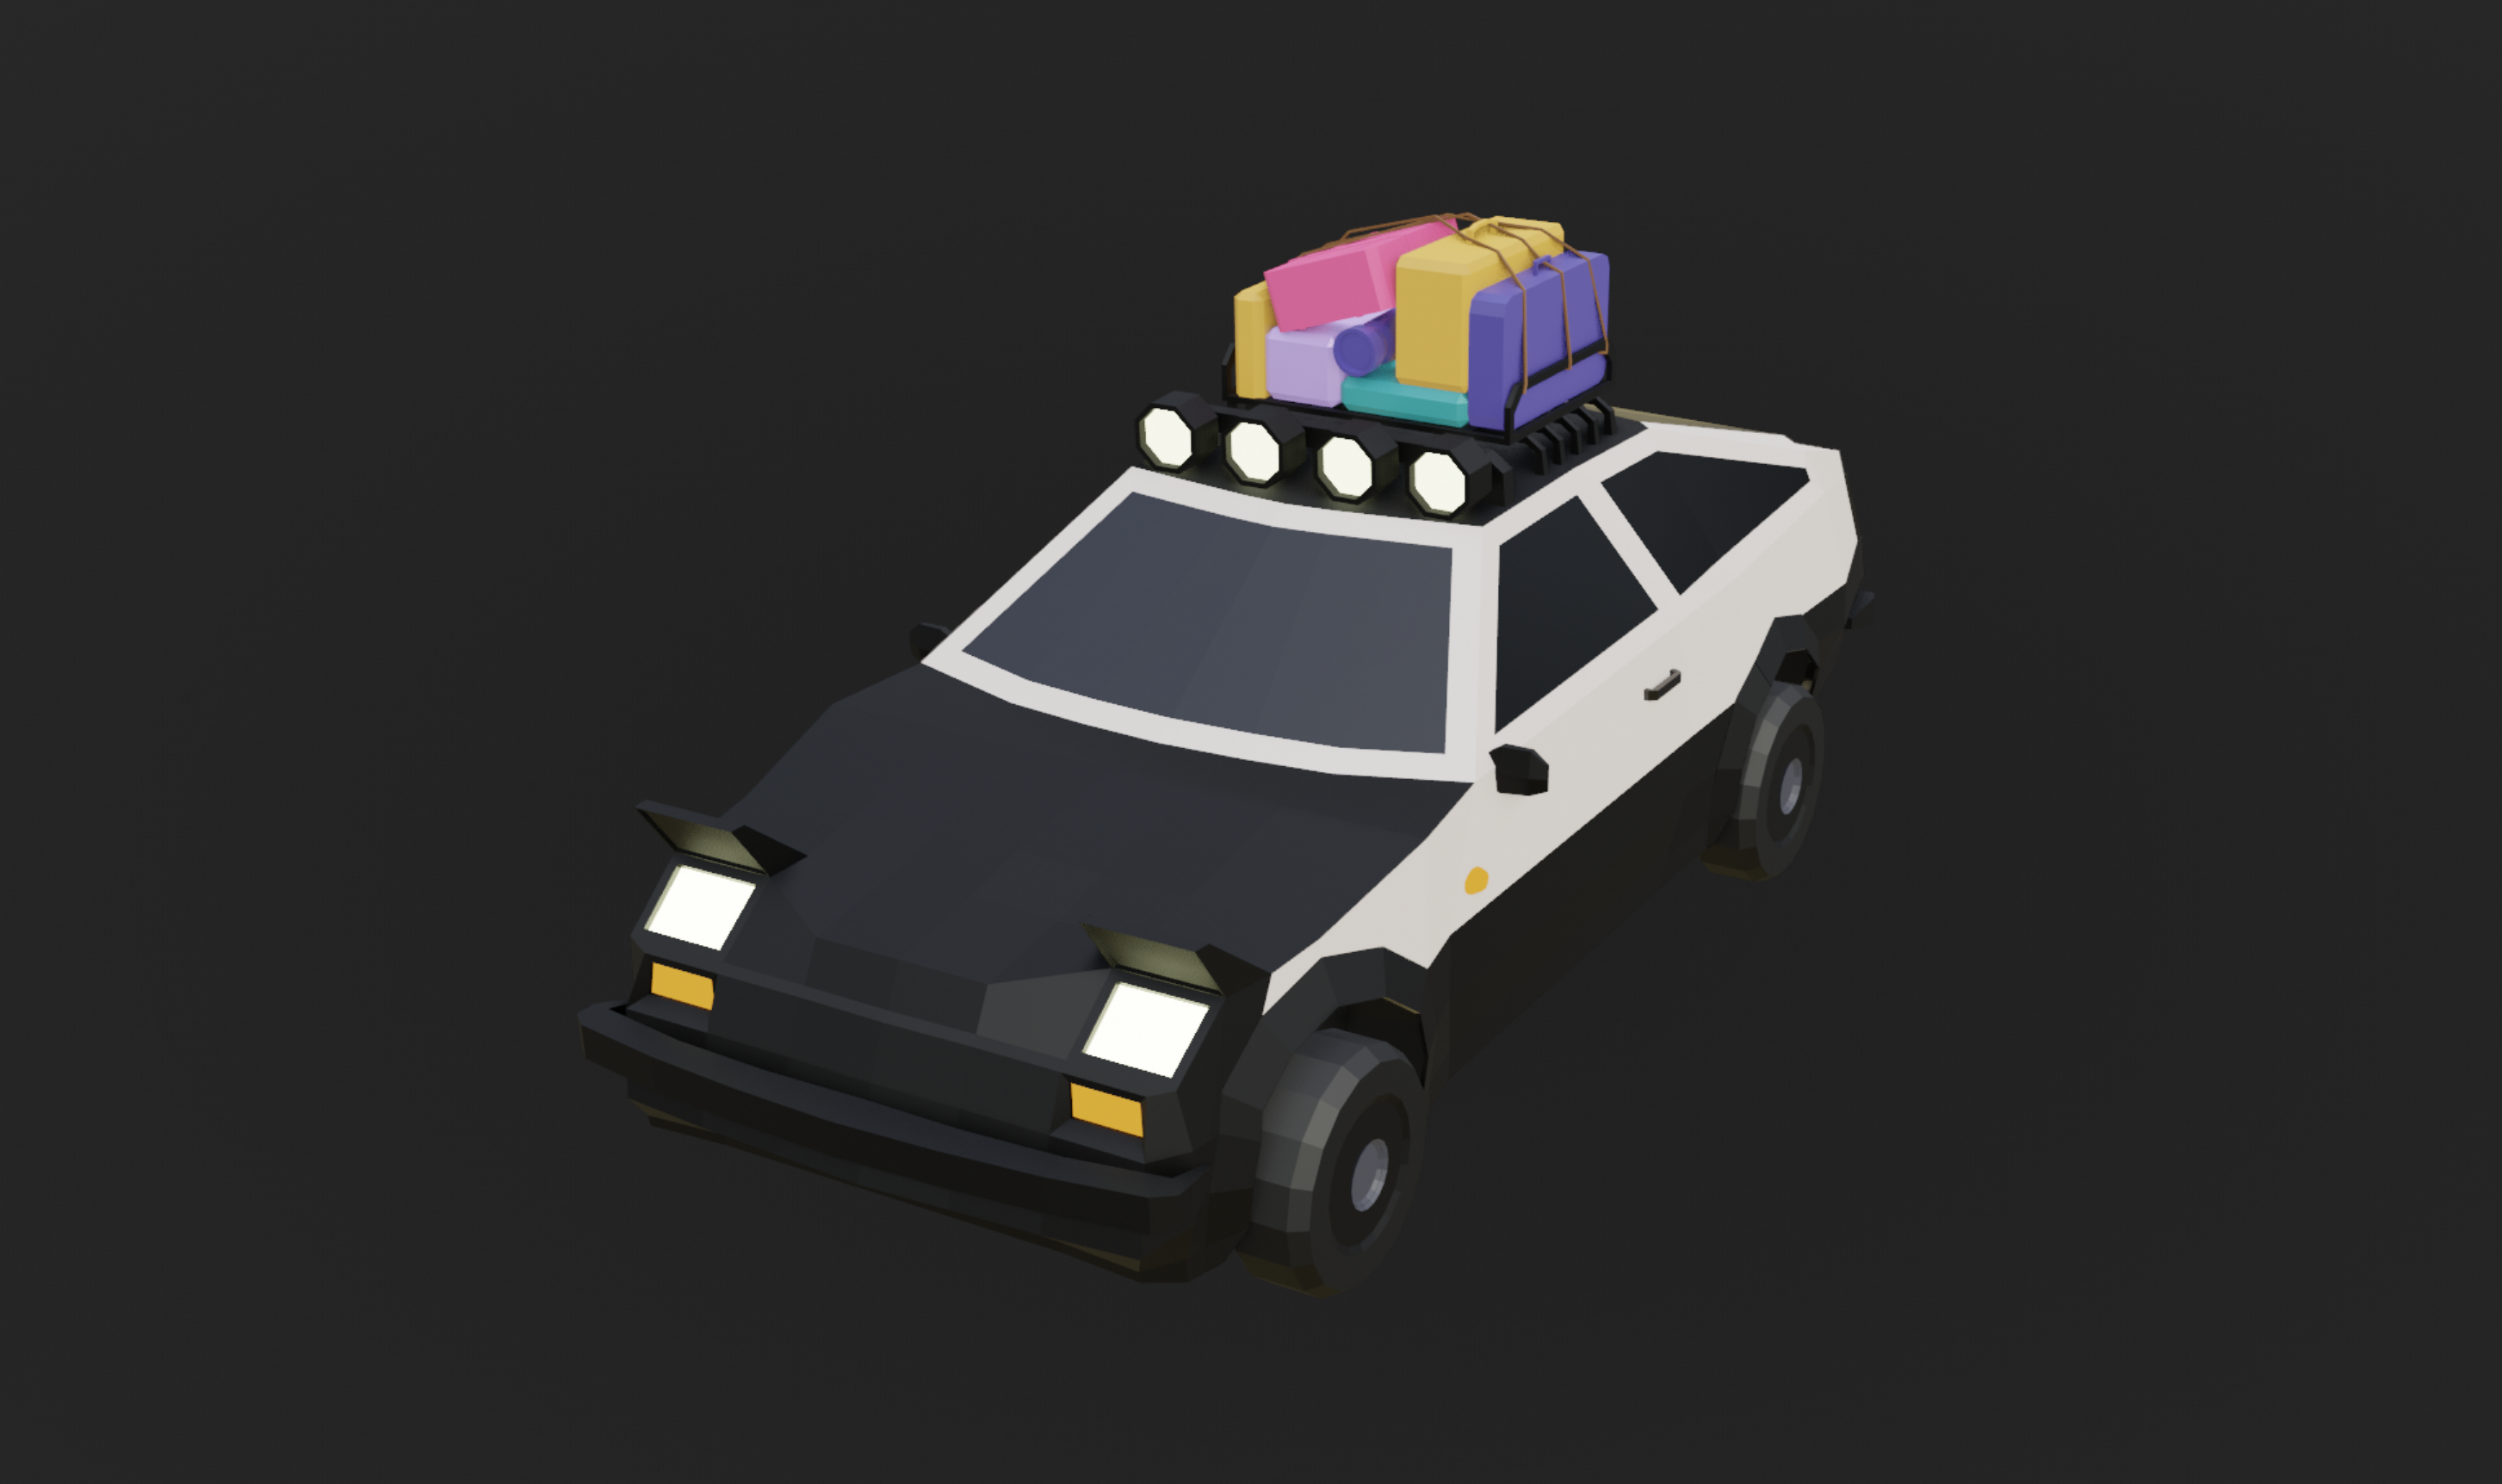 images//f8314c70f112d3eb31479542bd653757.LowPoly_CyberCar.png